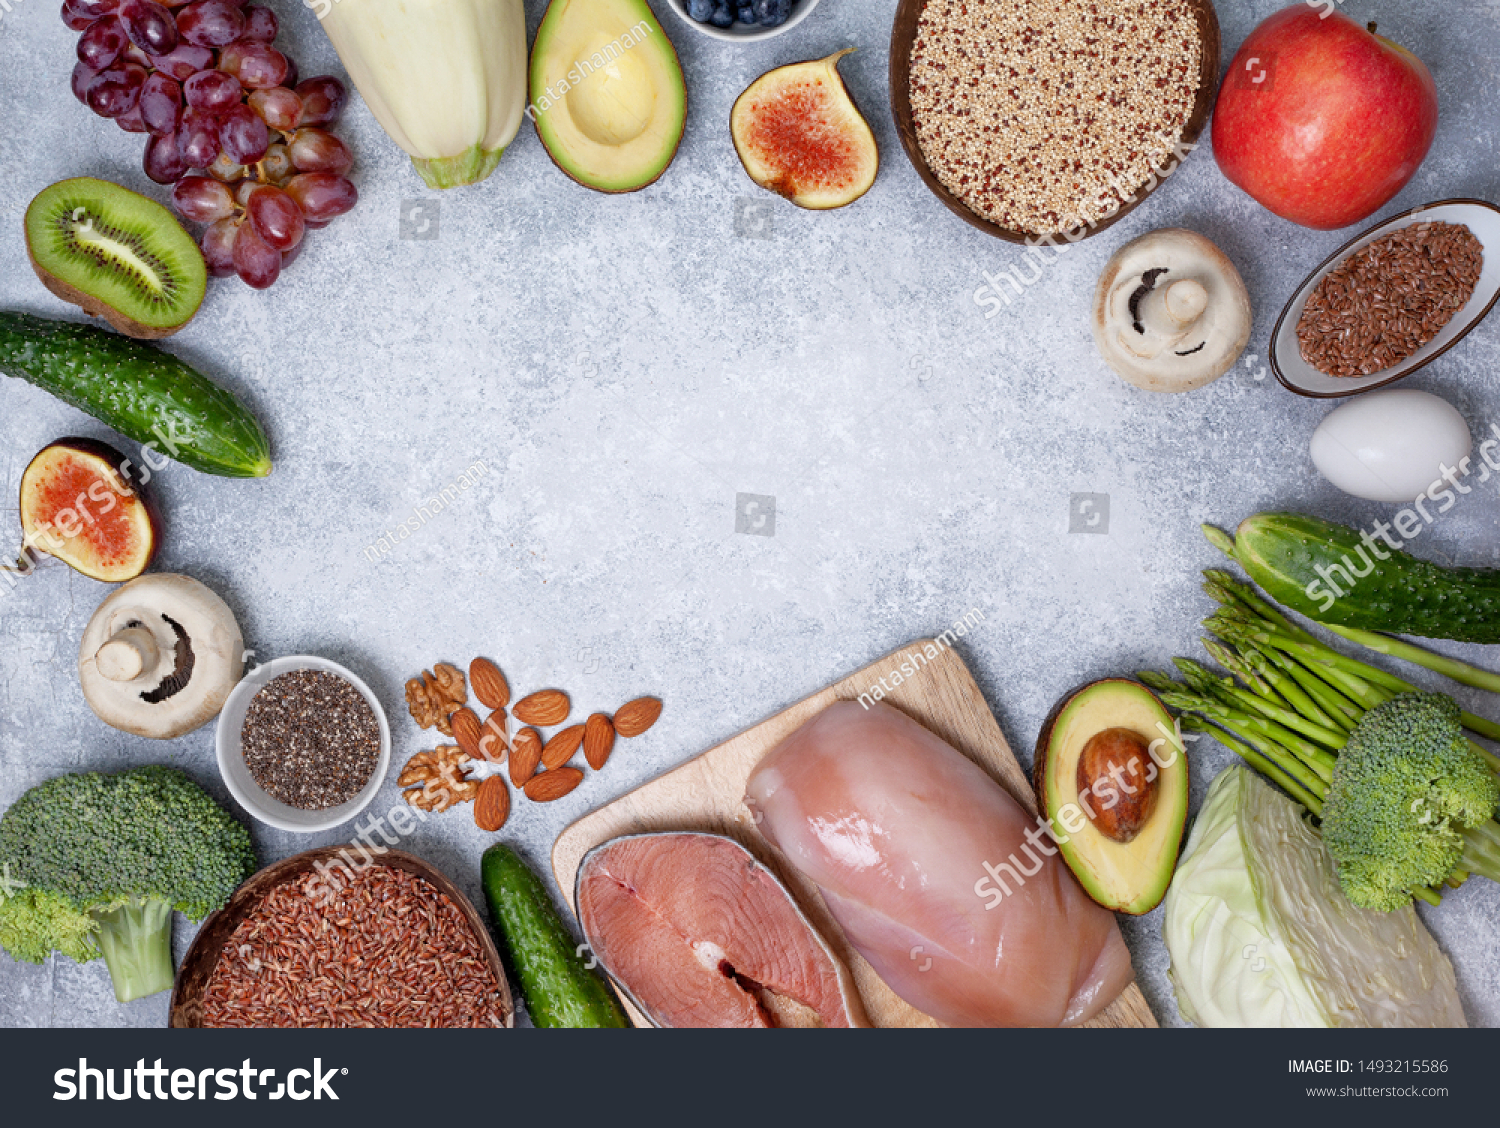 trendy pegan diet. pegan diet products : meat, fish, cereals, vegetables, nuts and berries. view from above #1493215586